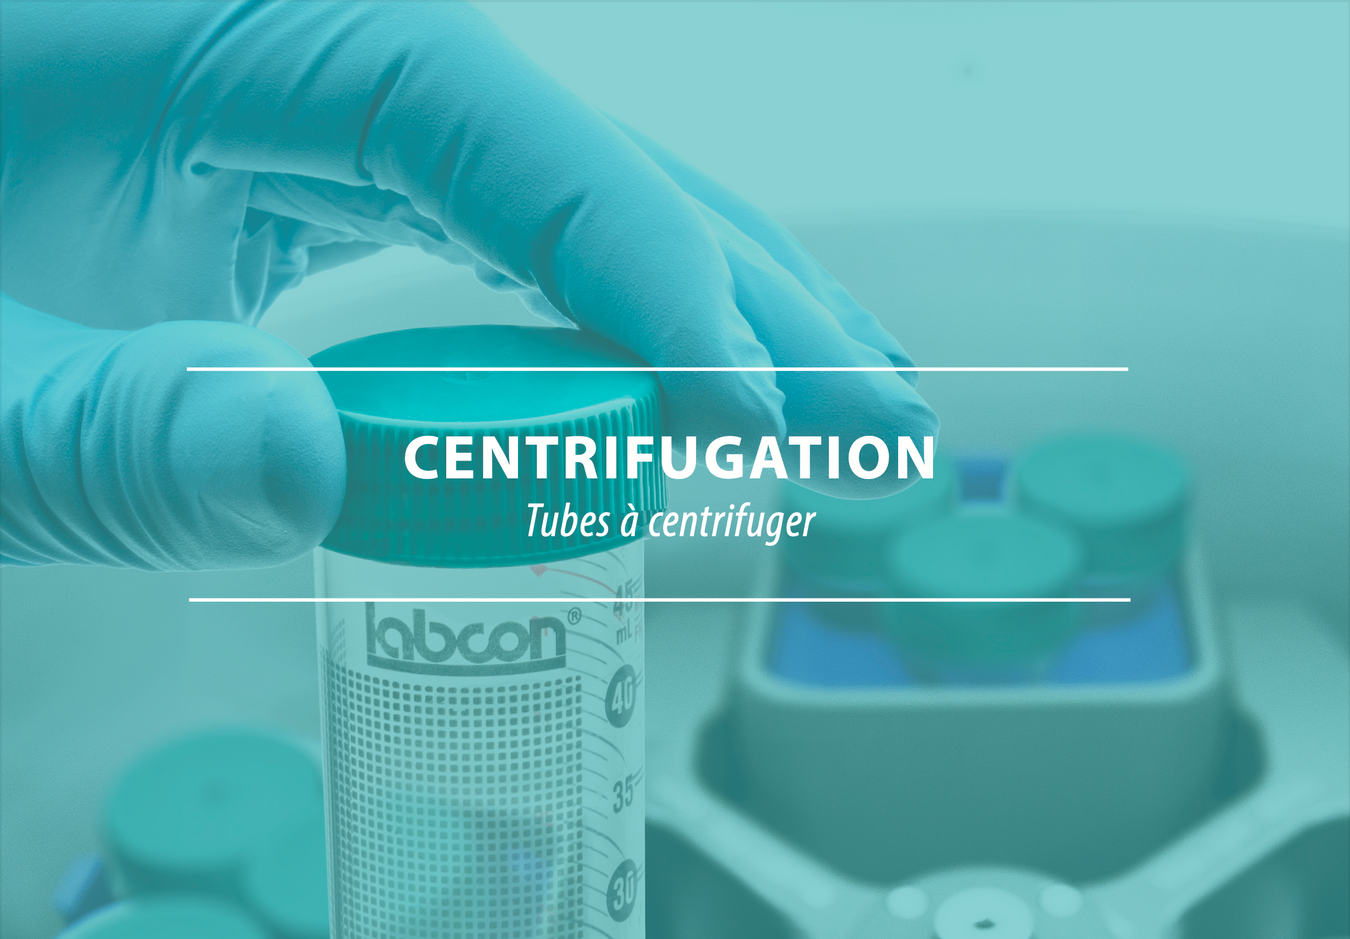 Labcon centrifuge or conical tubes product information on variants and quality assurances